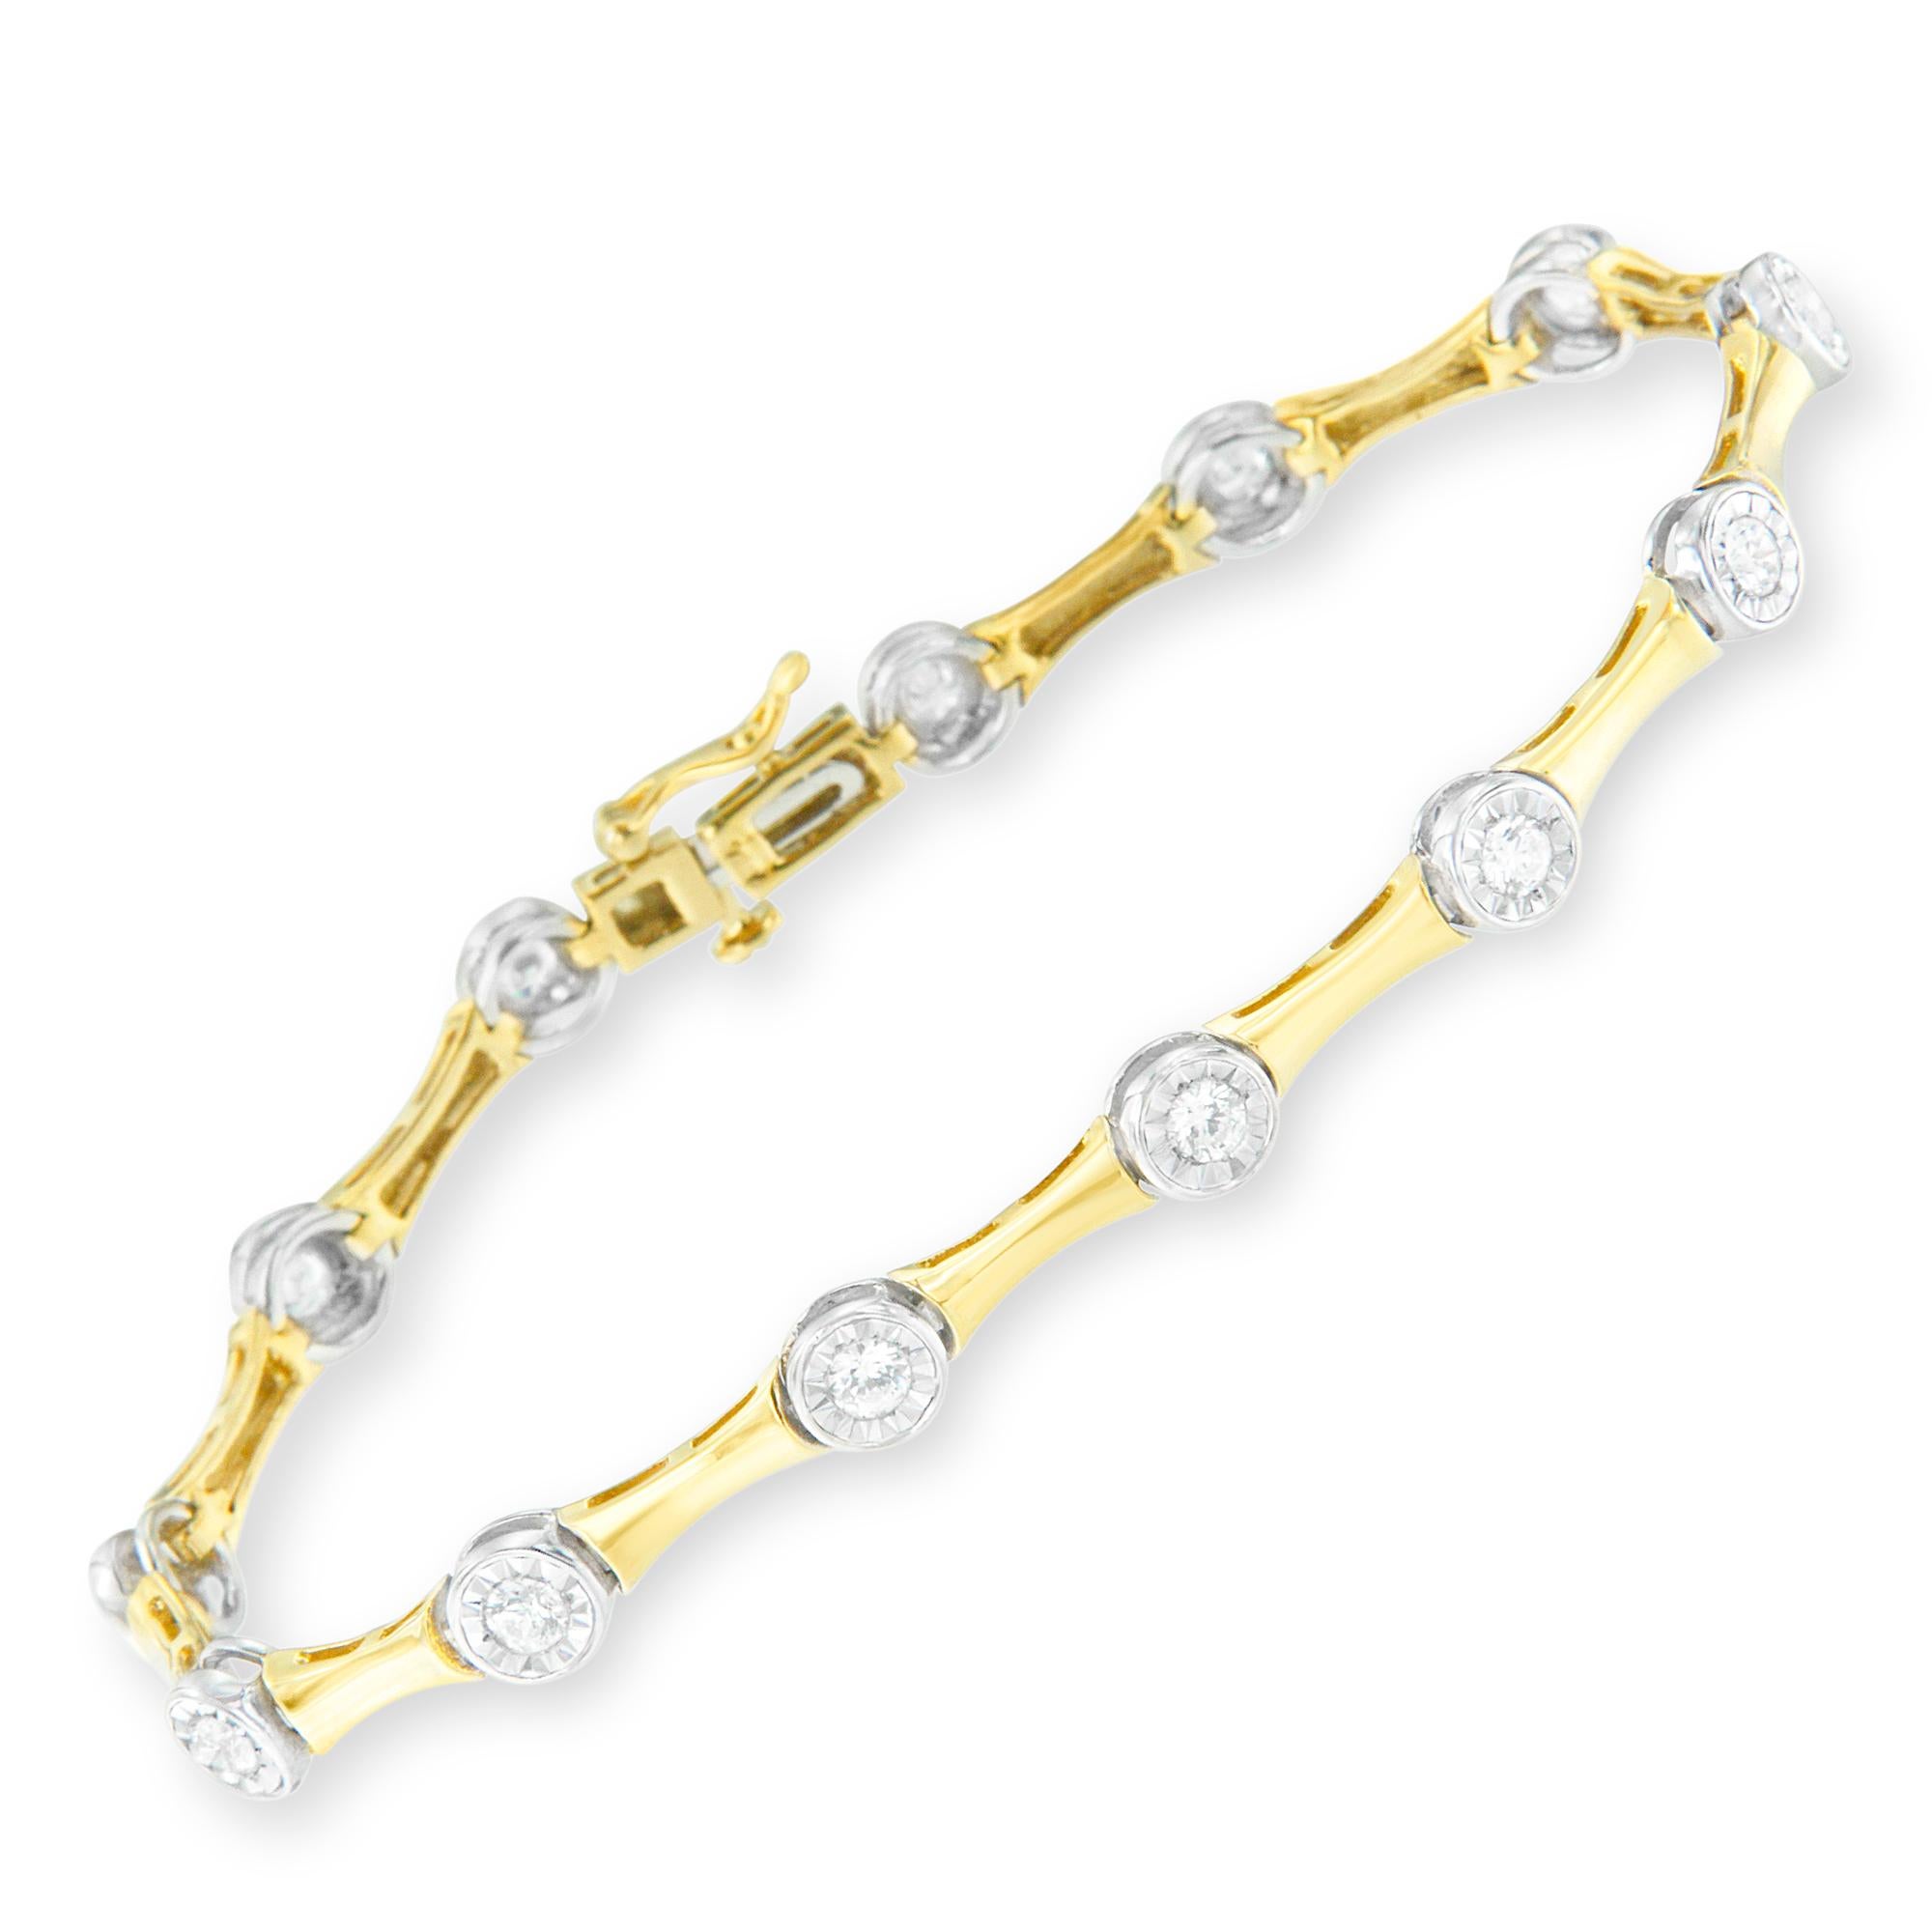 Introducing a breathtaking masterpiece that will captivate every eye it adorns. Crafted with love, this 10K Yellow Gold Flashed .925 Sterling Silver Miracle Set Round-Cut Diamond Bezel Style Link Bracelet is a true testament to elegance and grace.